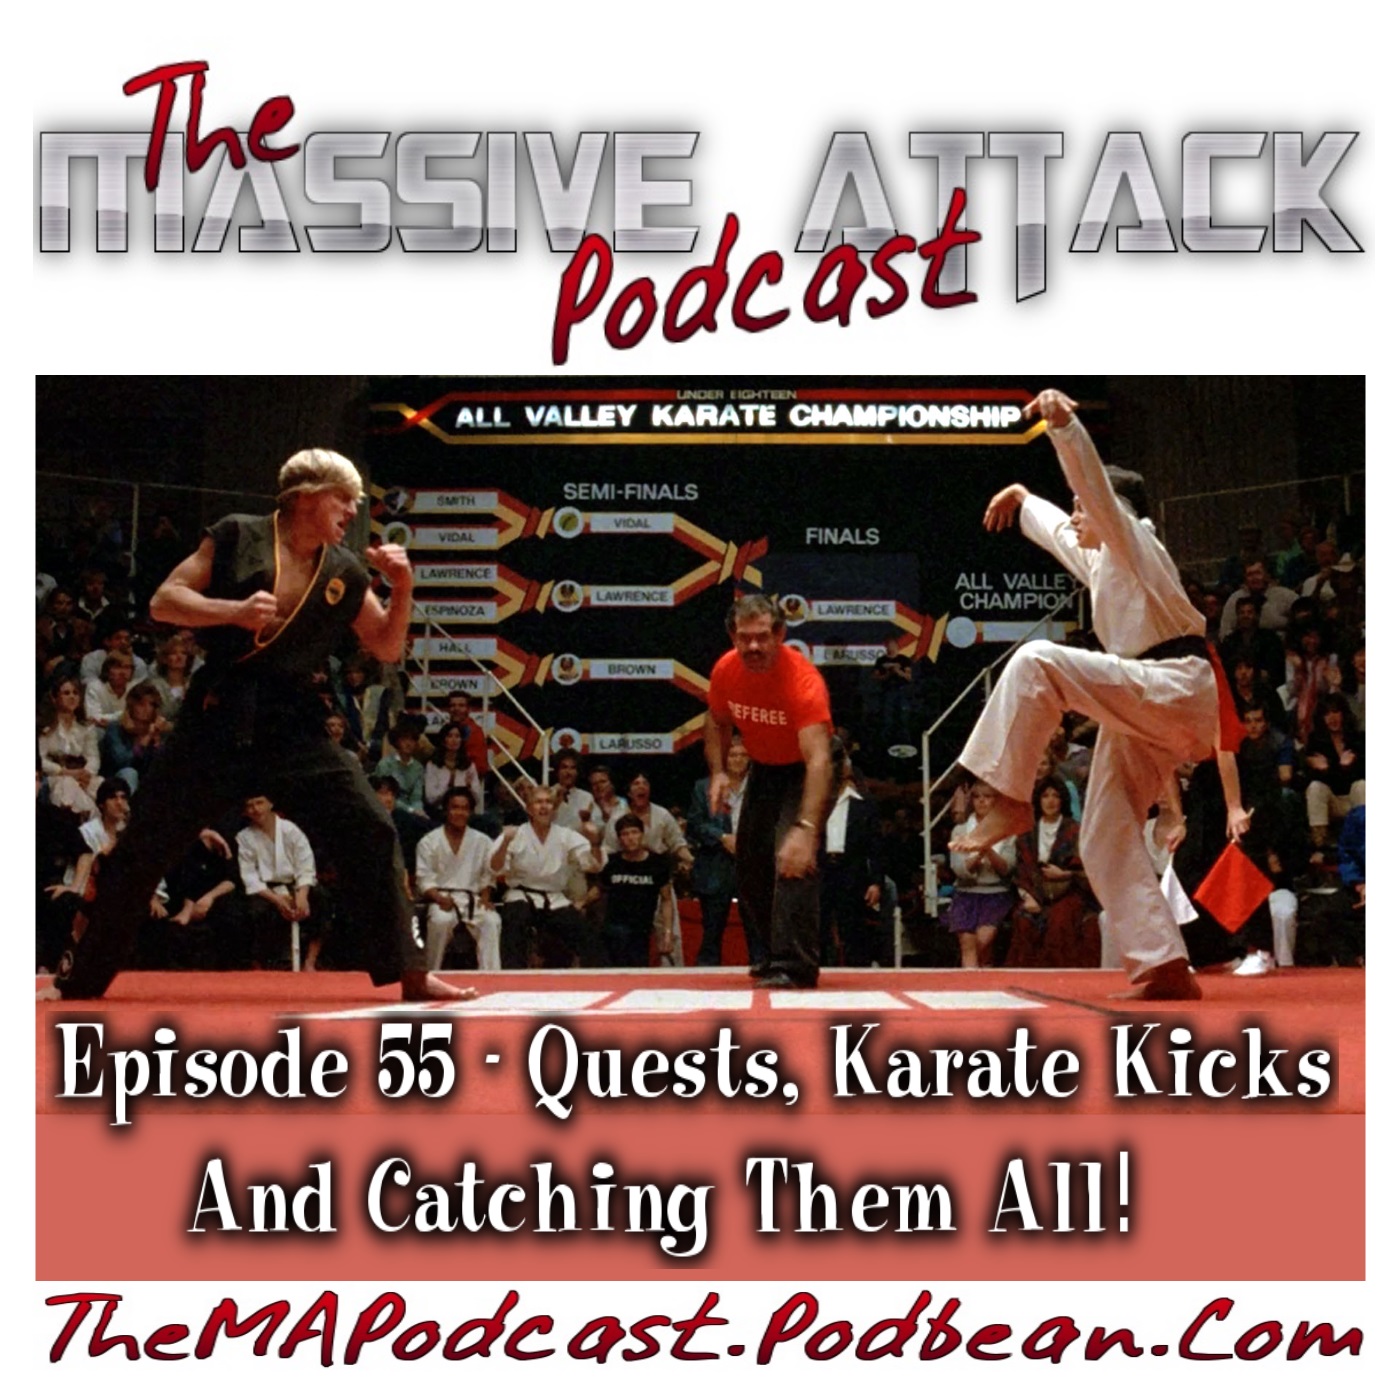 Episode 55 - Quests, Karake Kicks and Catching Them All!